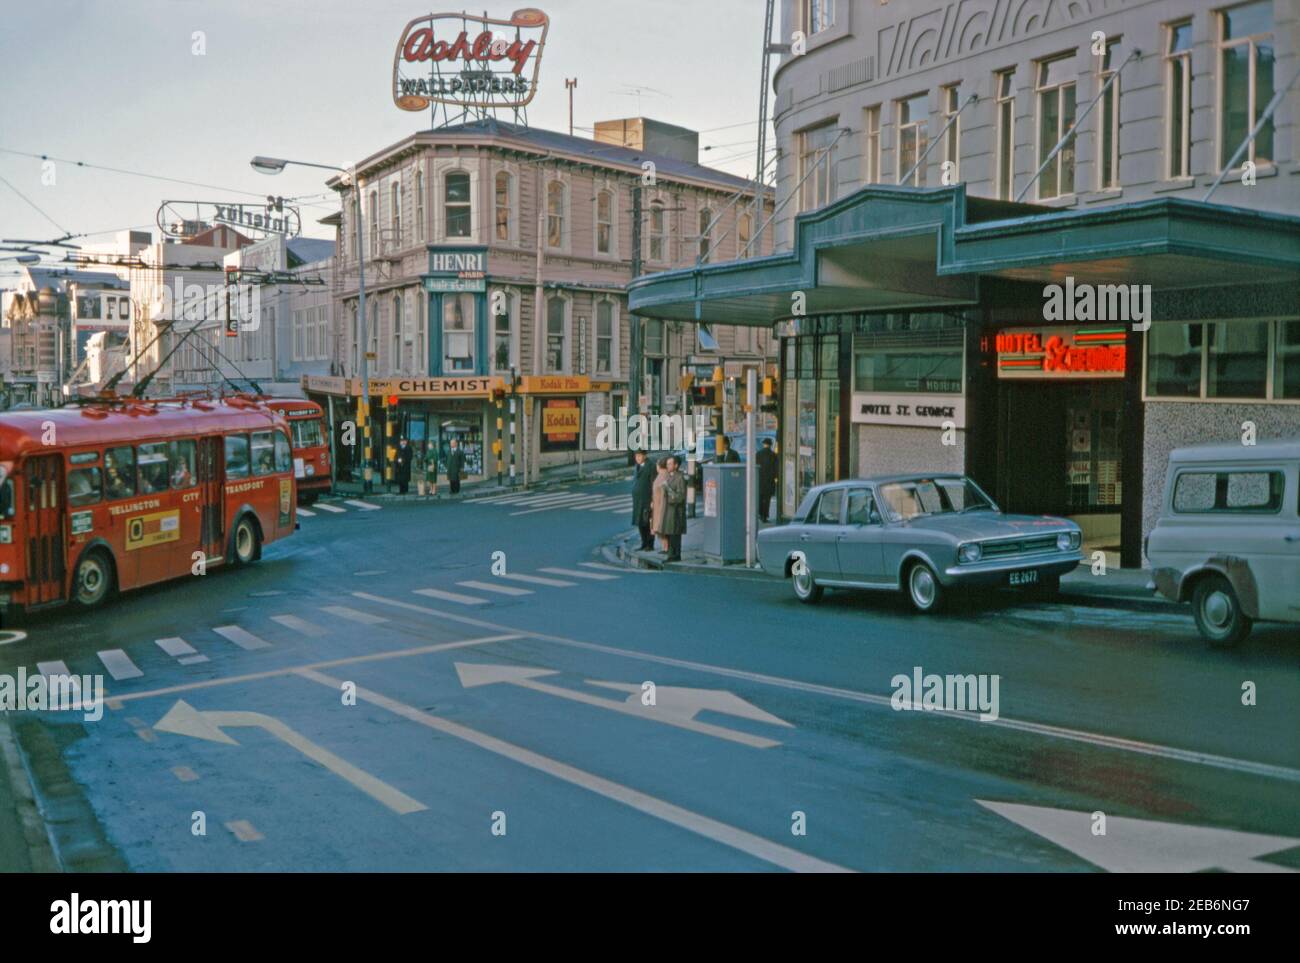 A view at the junction of Willis and Boulcott Streets, Wellington, New Zealand 1969. The trolleybuses see here were big part of the municipal transport system. These electric vehicles operated in Wellington from 1924 until 1932 and again from 1949 until 2017. It was the last trolleybus system operating in the country. The Hotel St George (right) was once one of Wellington’s top hotels. It is an Art Deco building occupying an historic corner site. It was briefly the country's largest hotel. Wellington is the capital city of New Zealand & is located at the south-western tip of the North Island. Stock Photo